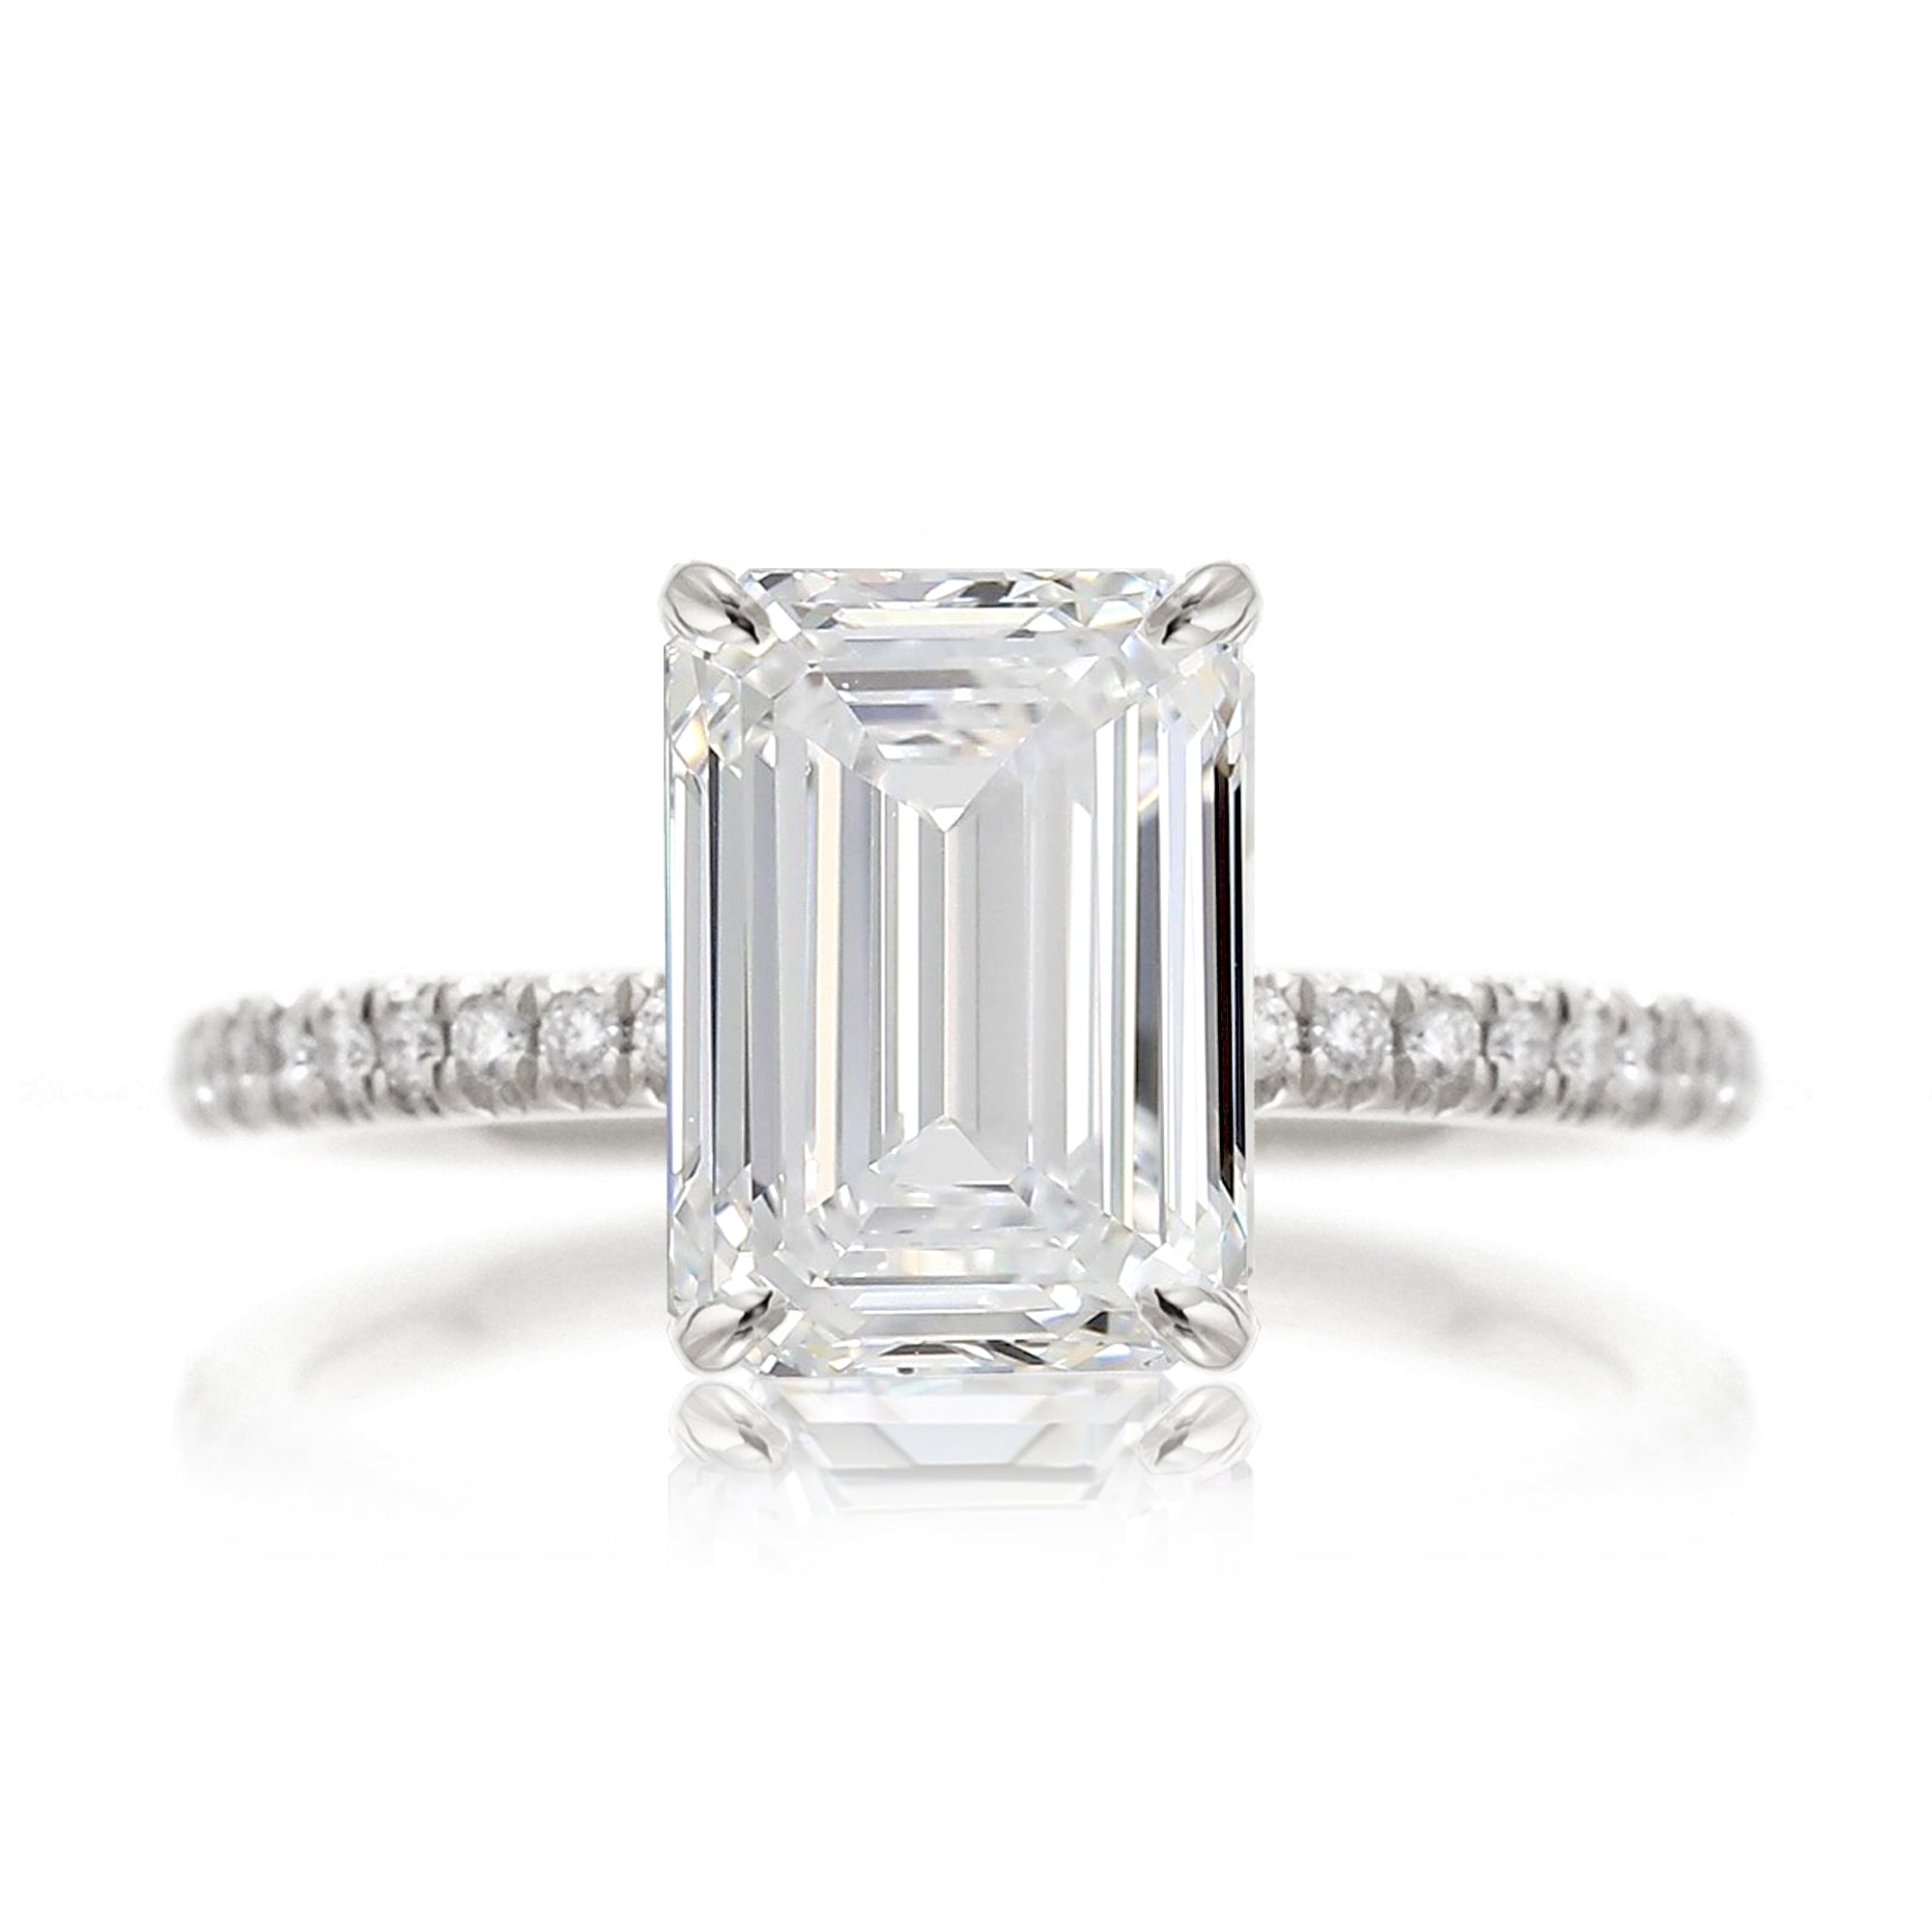 Emerald cut diamond band engagement ring white gold - the Ava